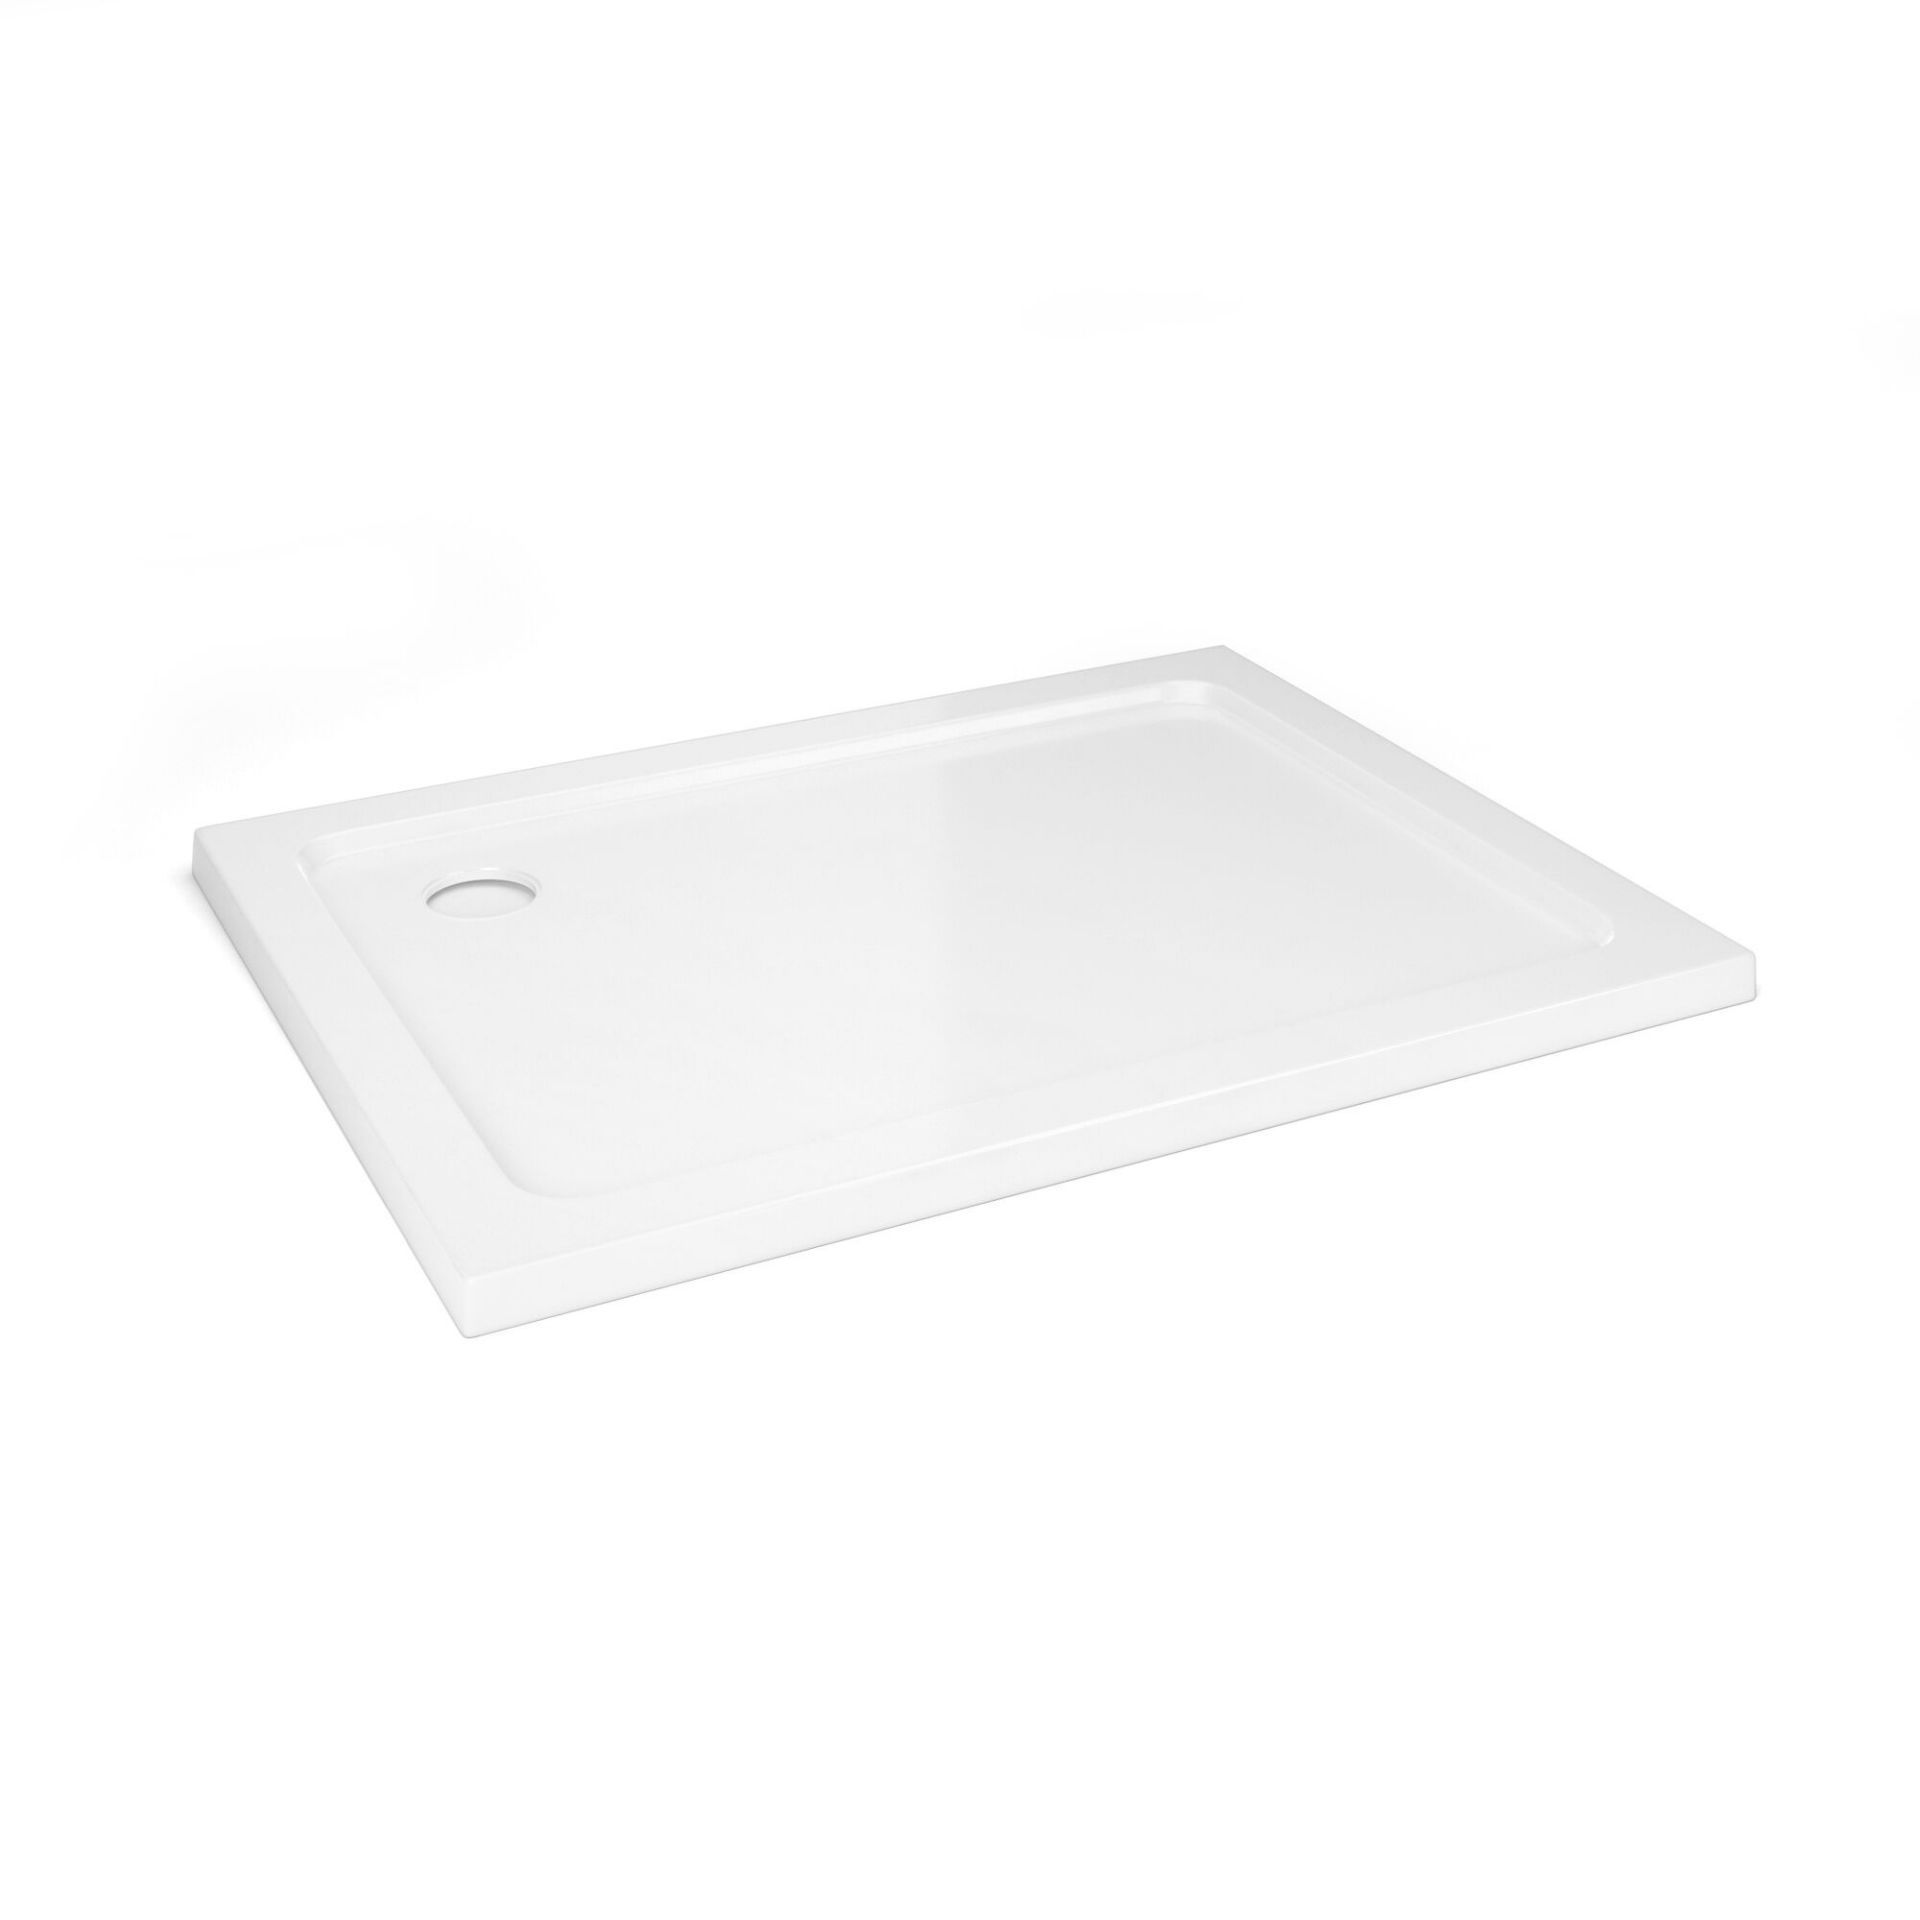 NEW 1000x900mm Rectangular Stone Shower Tray - Ultra Slim.RRP £399.99.Low profile ultra slim d... - Image 2 of 2